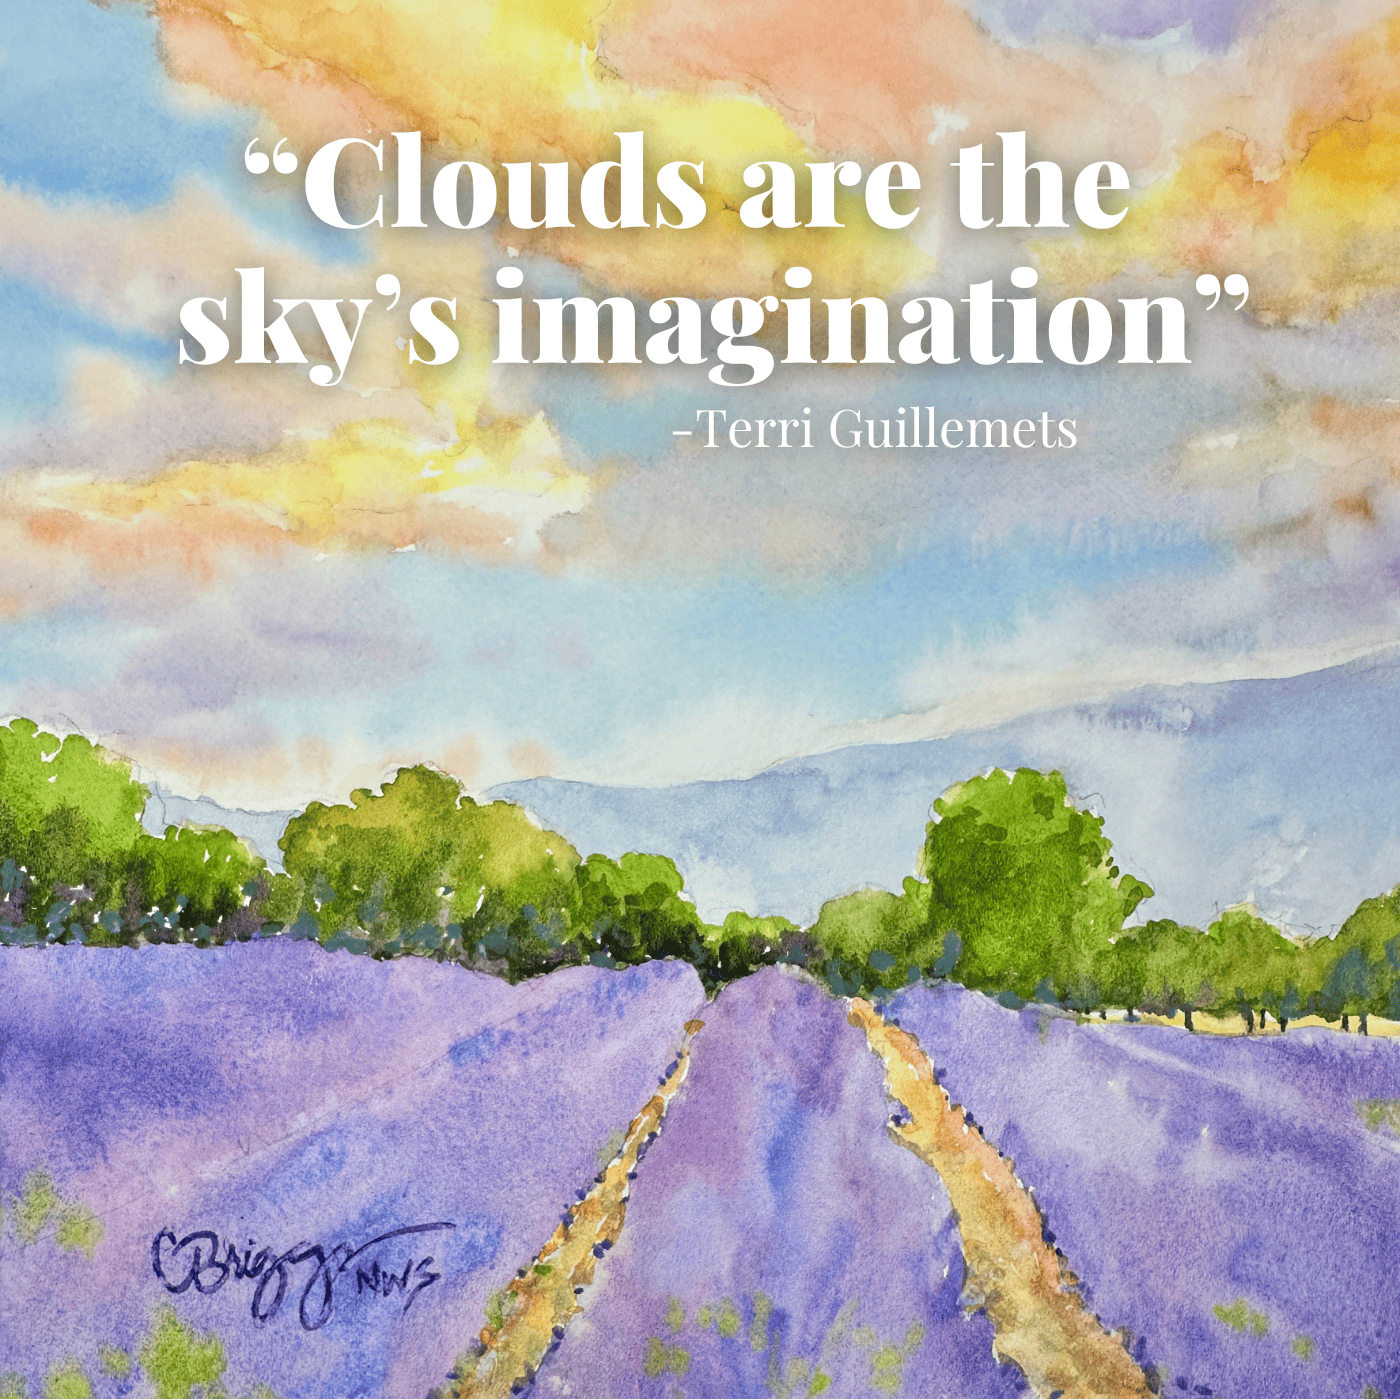 Watercolor painting of a cloudy sky with brushes and palette